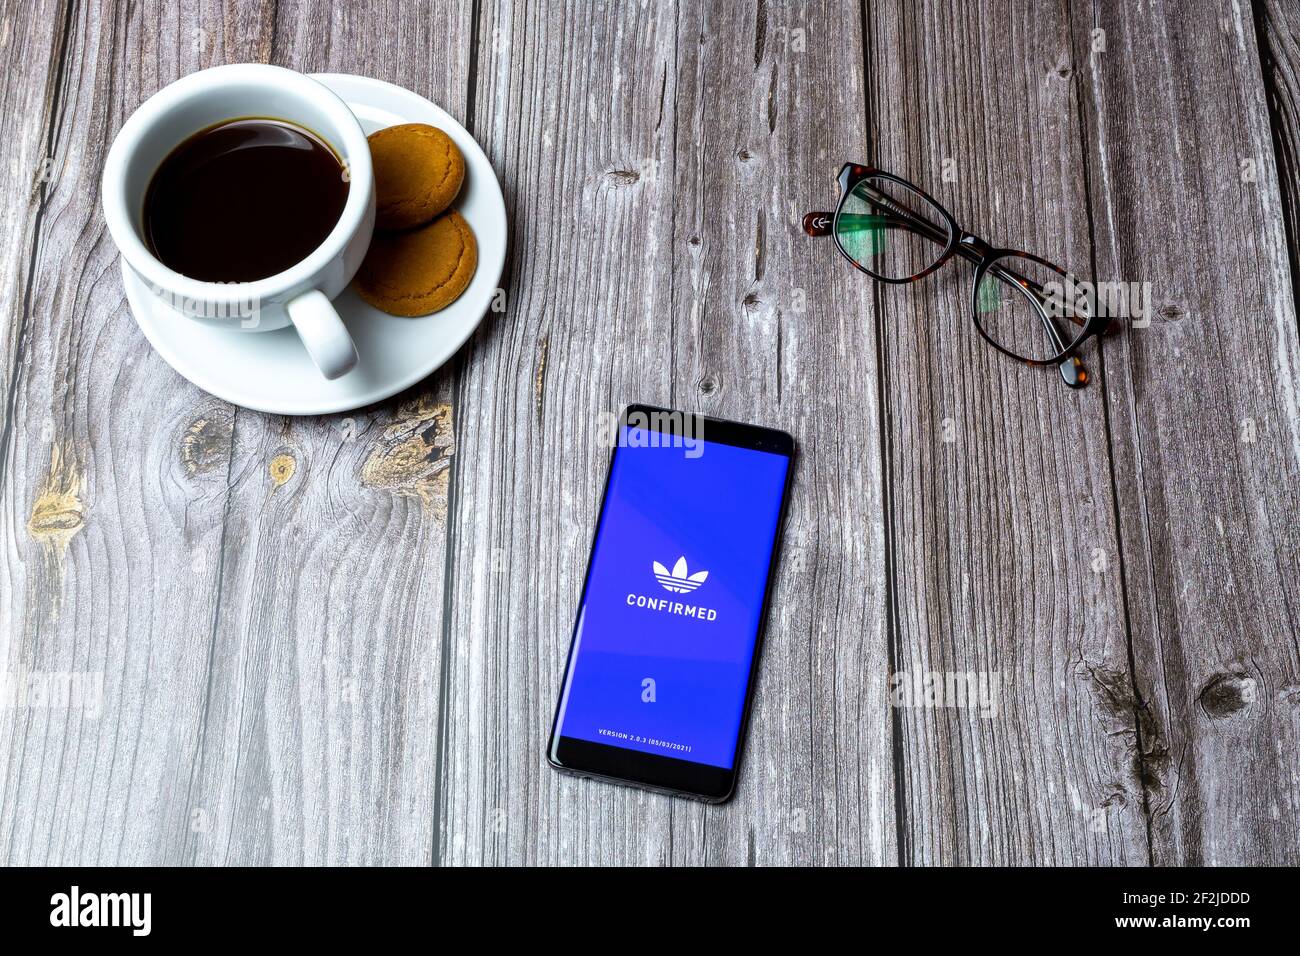 A Mobile phone or cell phone laid on a wooden table with the Adidas Confirmed app open on screen Stock Photo